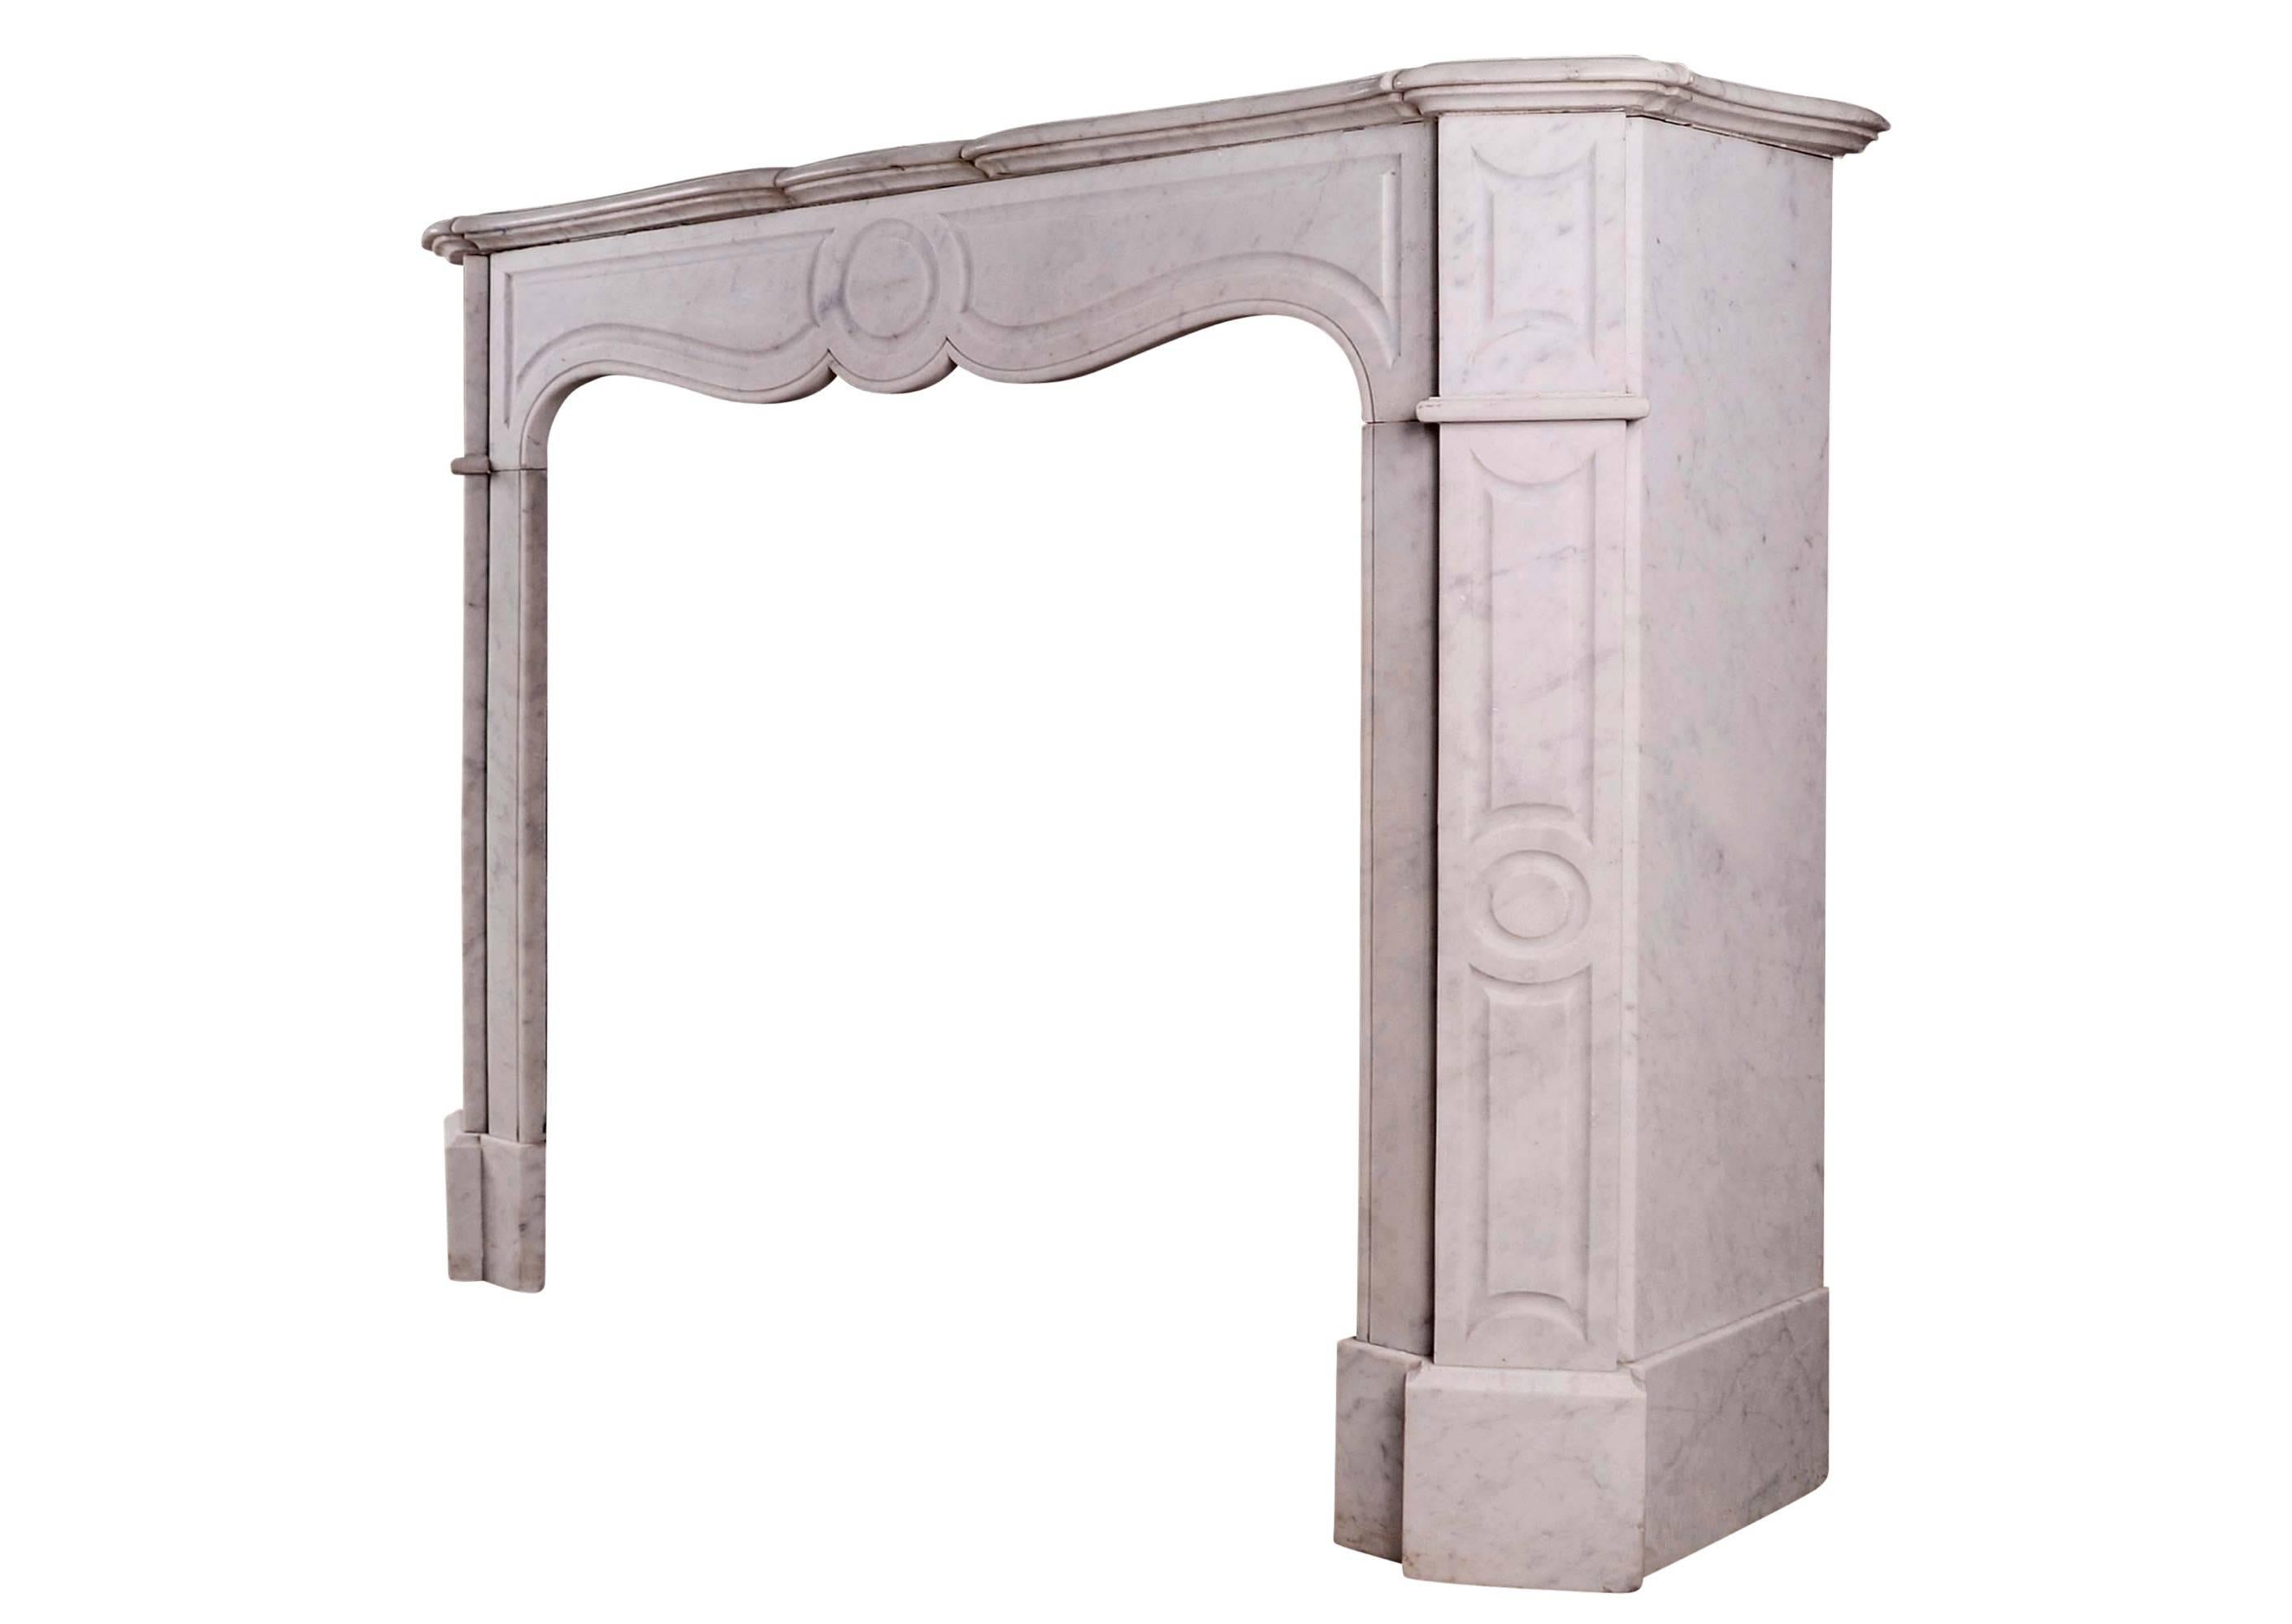 A 19th century French Pompadour fireplace in light Carrara marble. The jambs and frieze with panels, surmounted by moulded shelf. (Photo prior to full restoration.)

Measure: Shelf width 1200 mm 47 ¼ in
Overall height 1022 mm 40 ¼ in
Opening